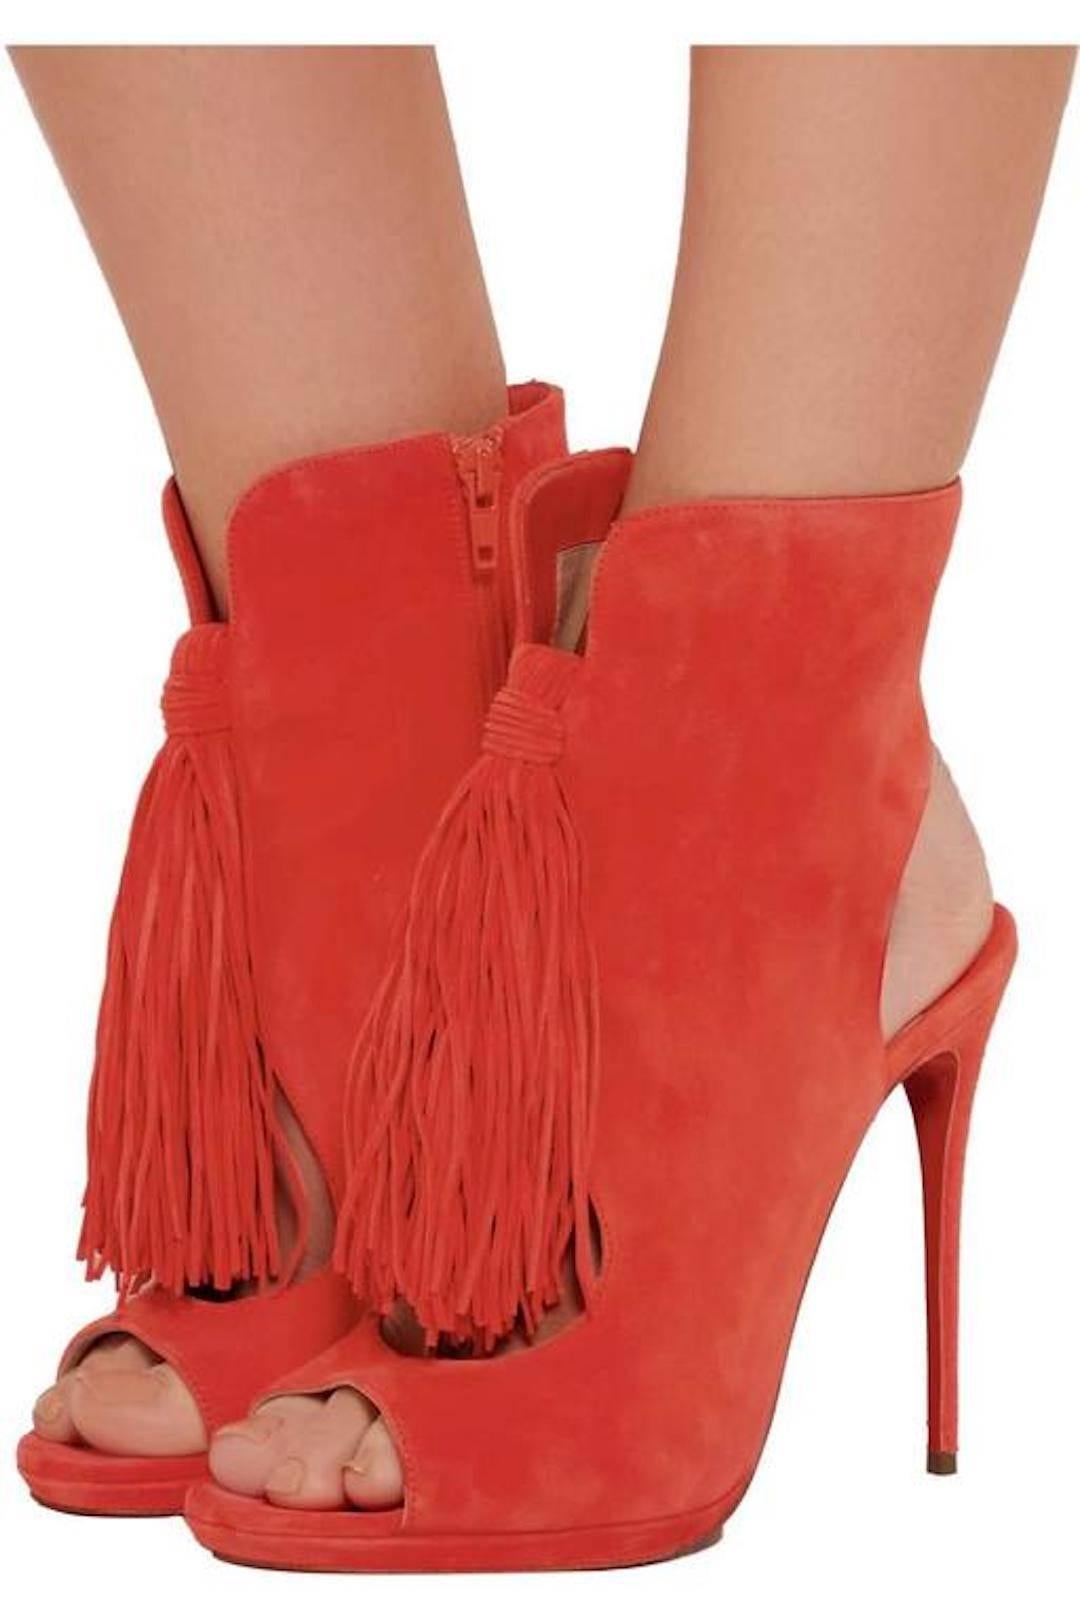 CURATOR'S NOTES  

Christian Louboutin NEW & SOLD OUT Orange Suede Fringe Sandals Heels in Box  

Size IT 39
Suede 
Zipper closure 
Made in Italy 
Heel height 5" 
Includes original Christian Louboutin box